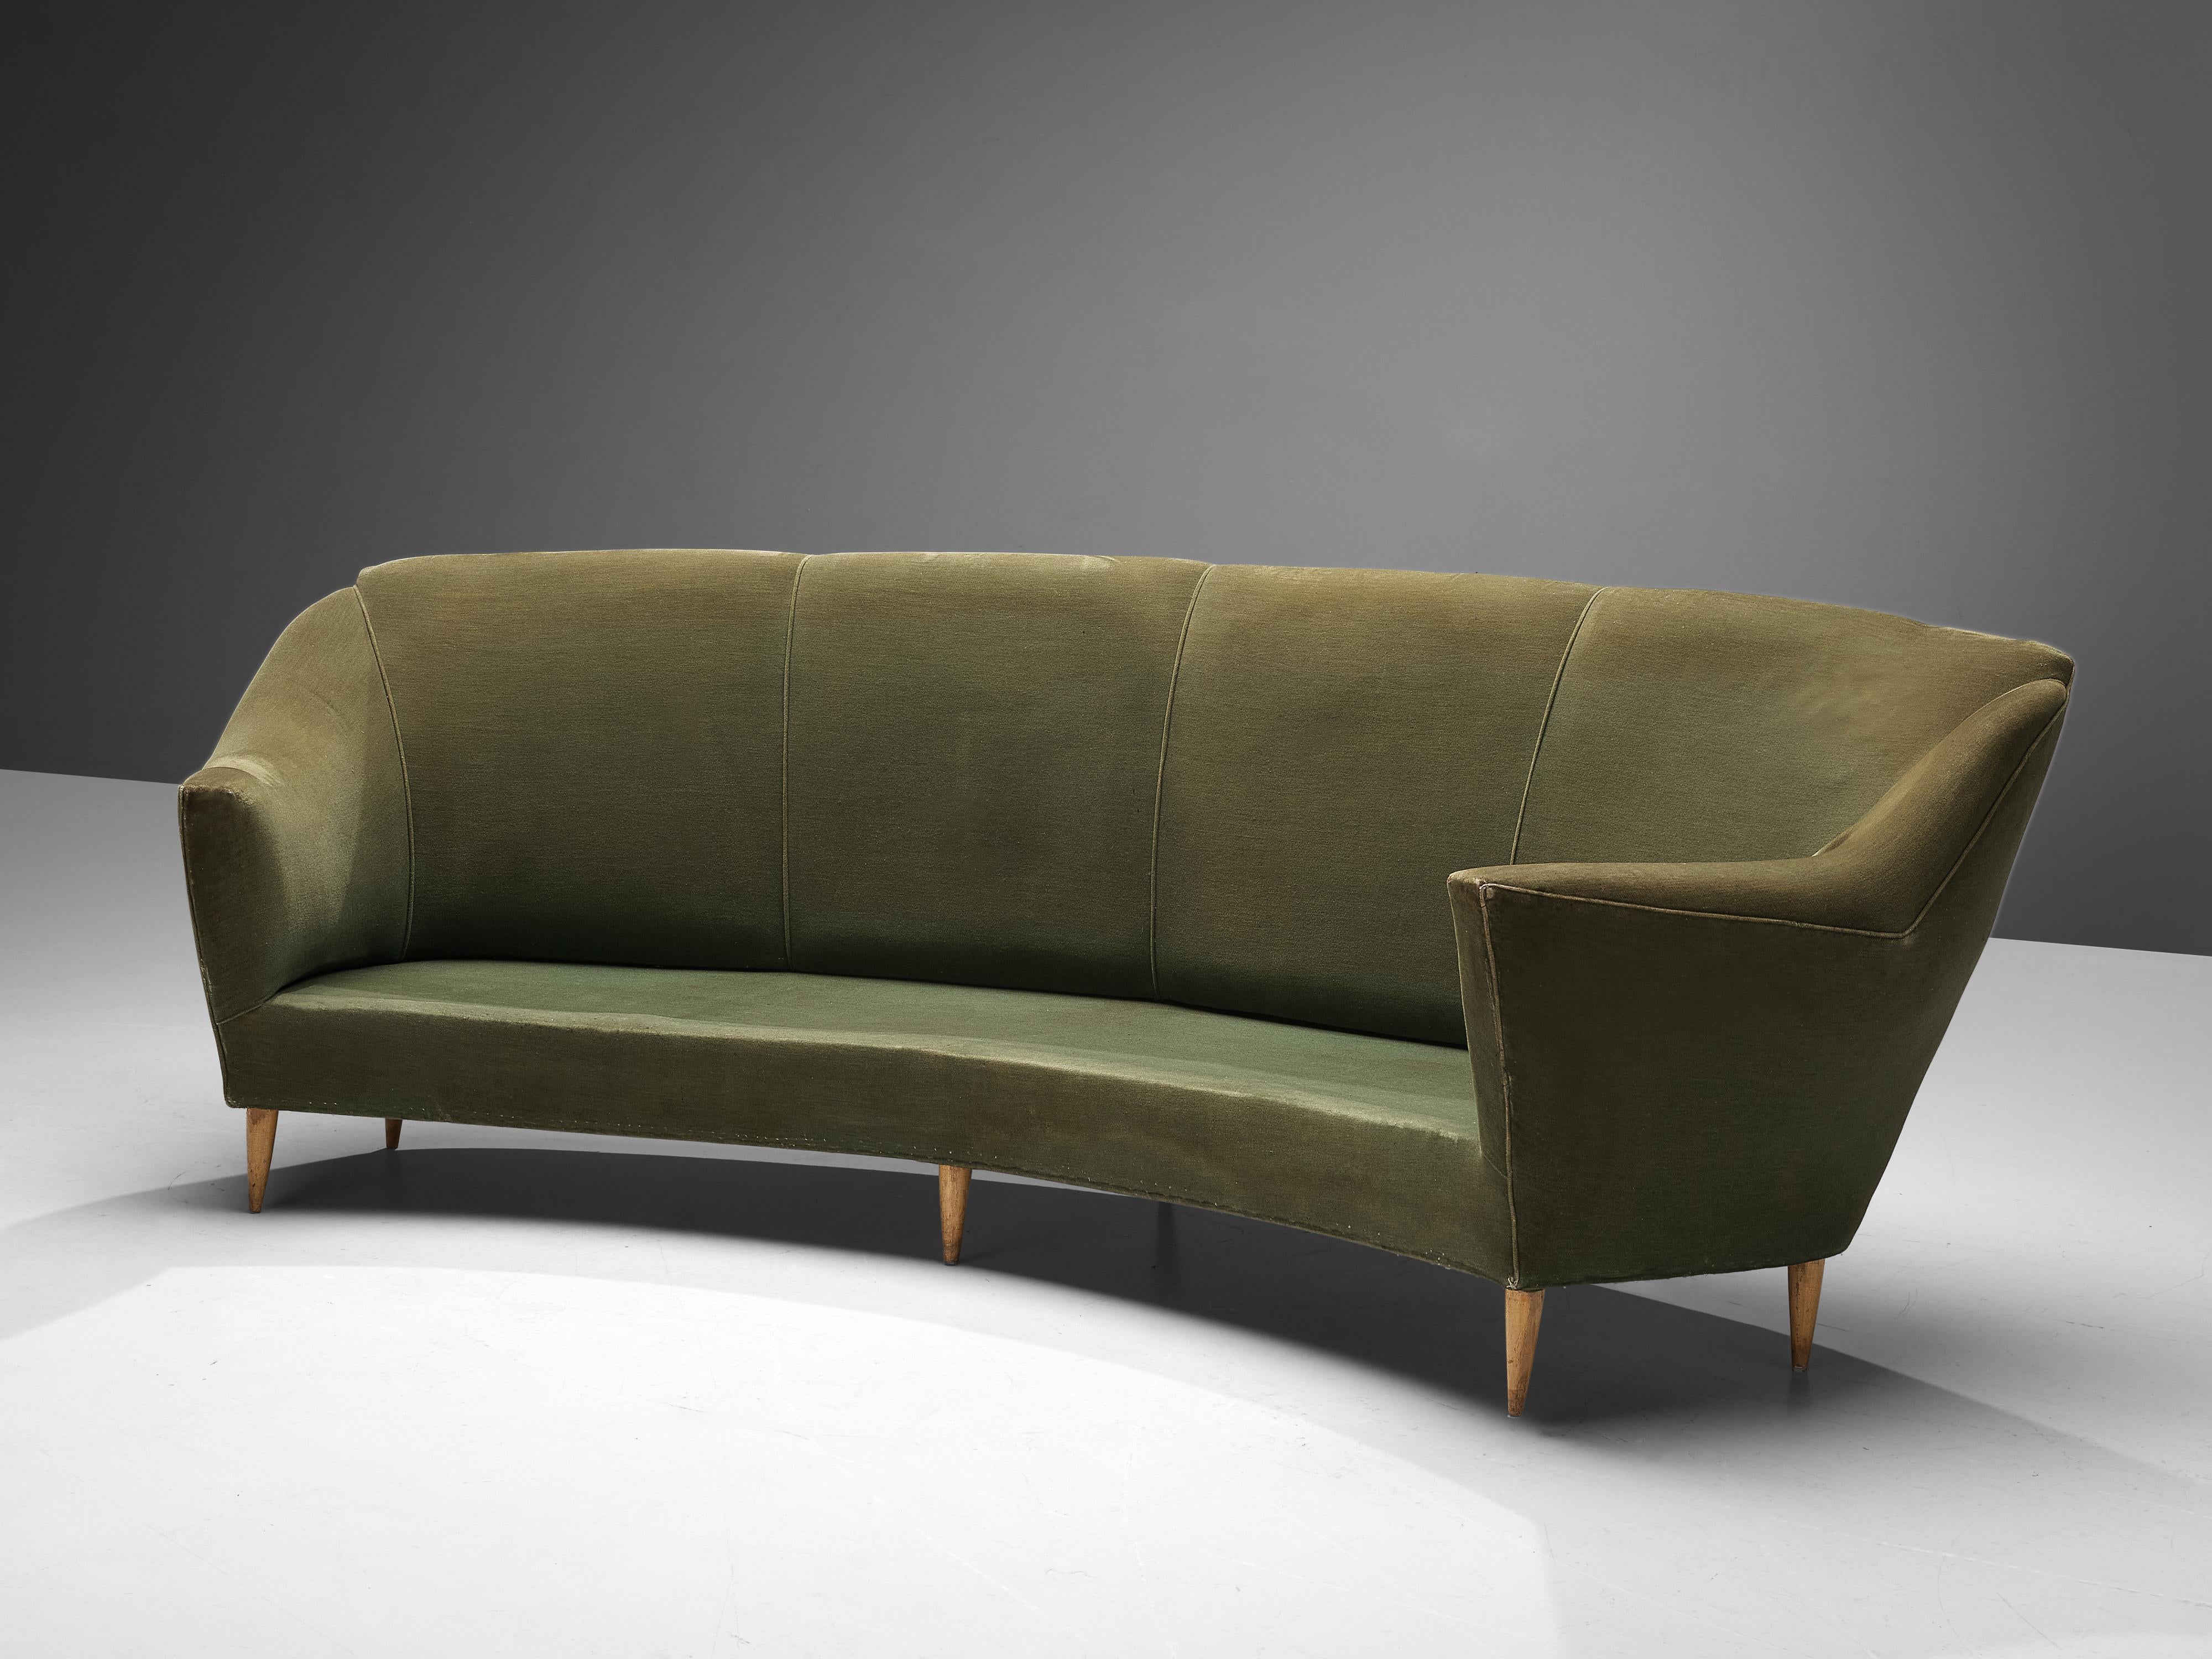 Italian Curved Three-Seat Sofa in Light Green Upholstery